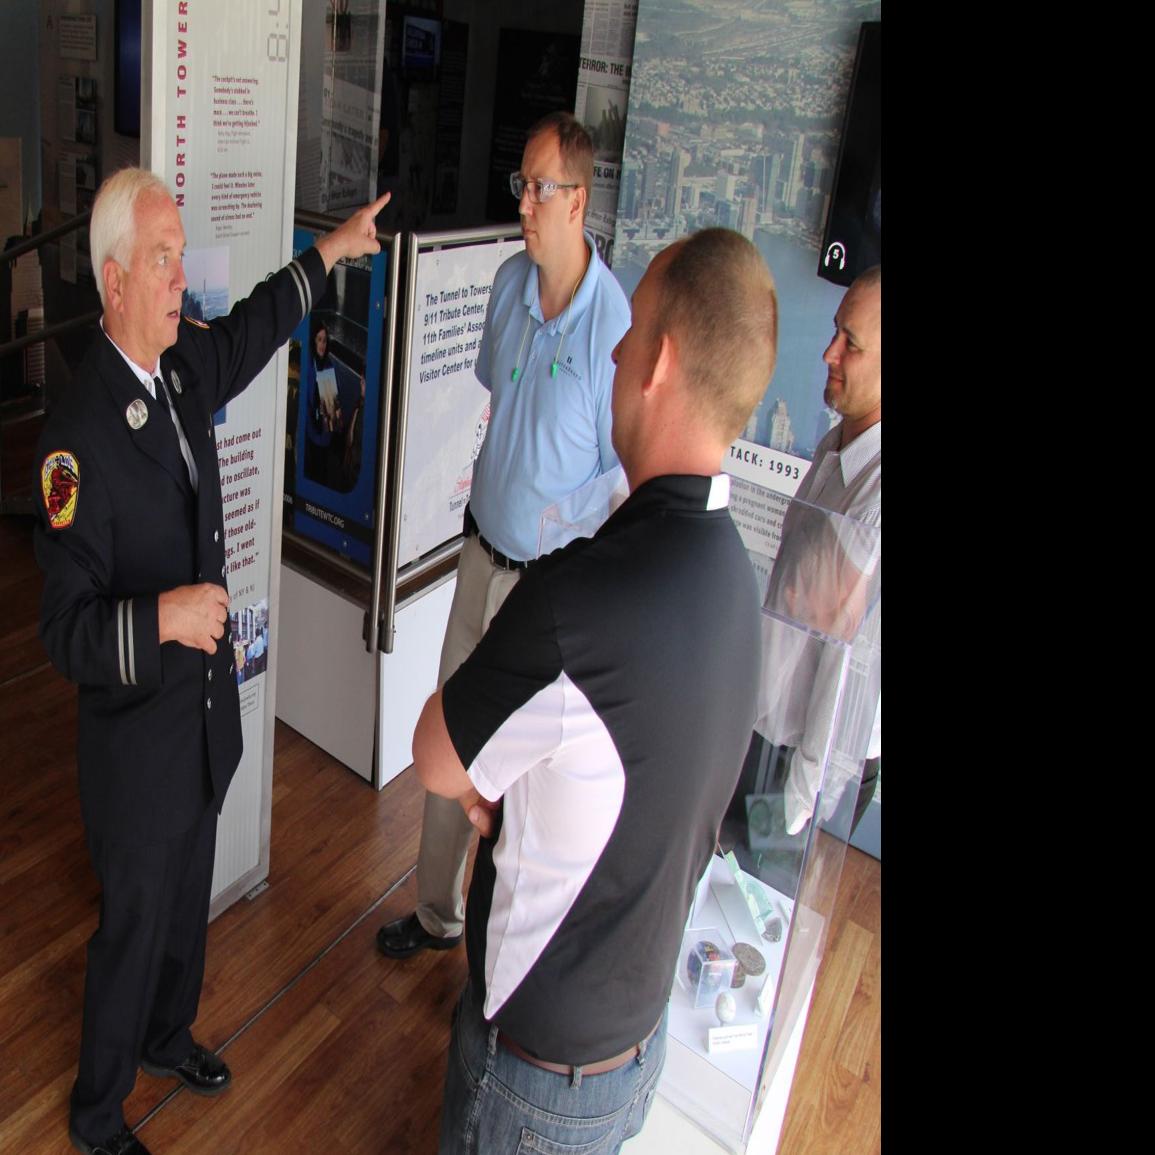 9 11 Exhibit Stops By Omega Cabinetry Local News Wcfcourier Com